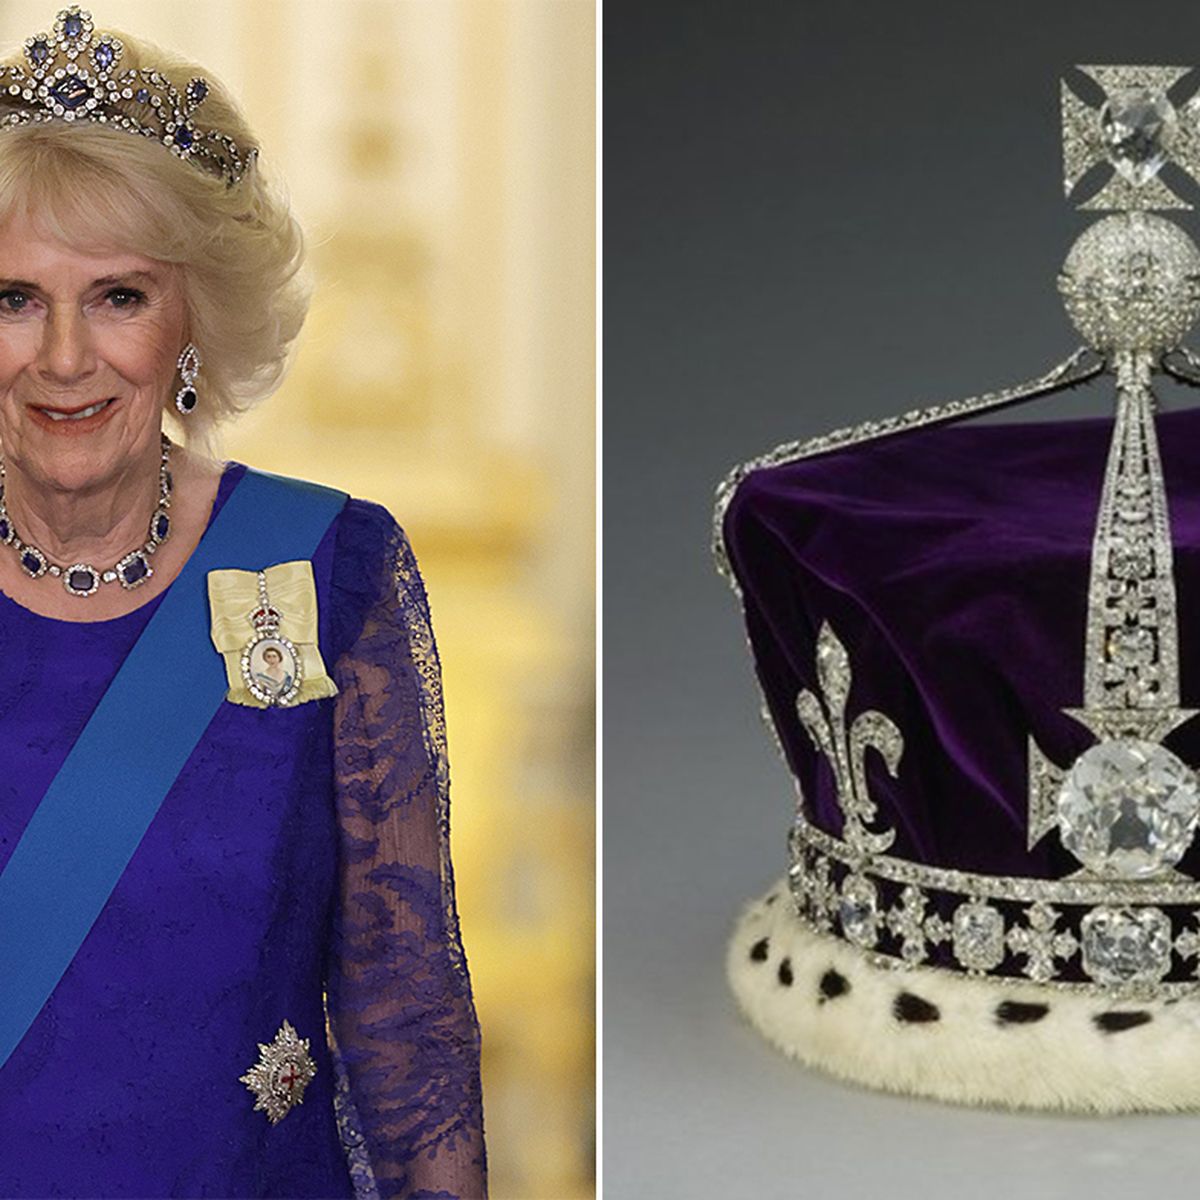 Tracing Koh-i-Noor's journey from India to Persia to India to the British  crown jewels